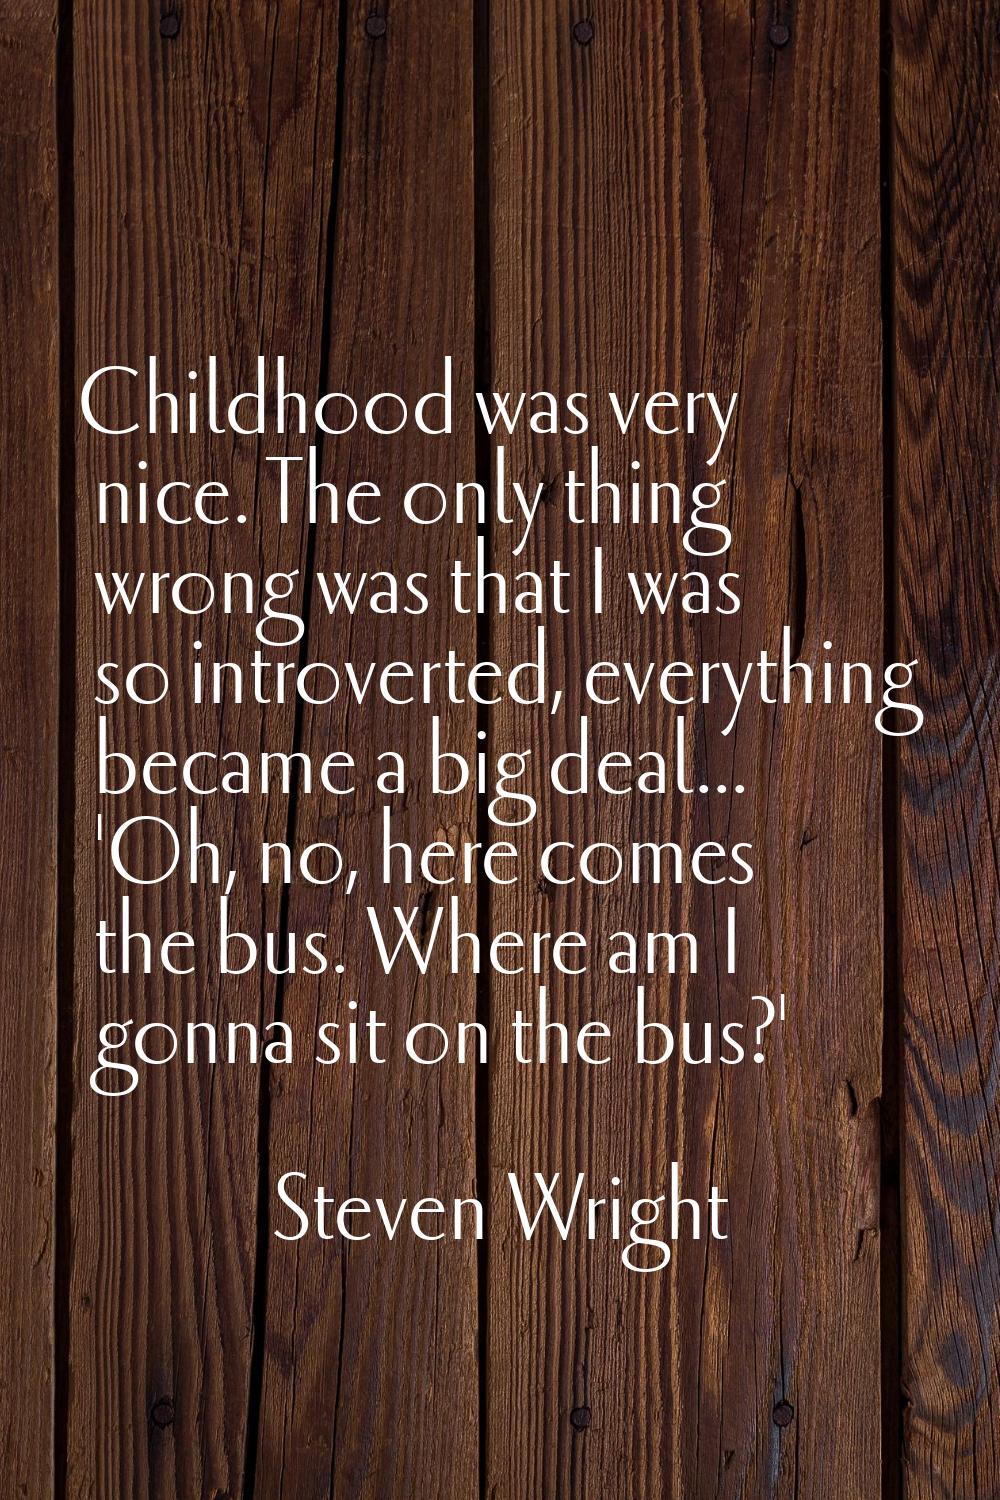 Childhood was very nice. The only thing wrong was that I was so introverted, everything became a bi